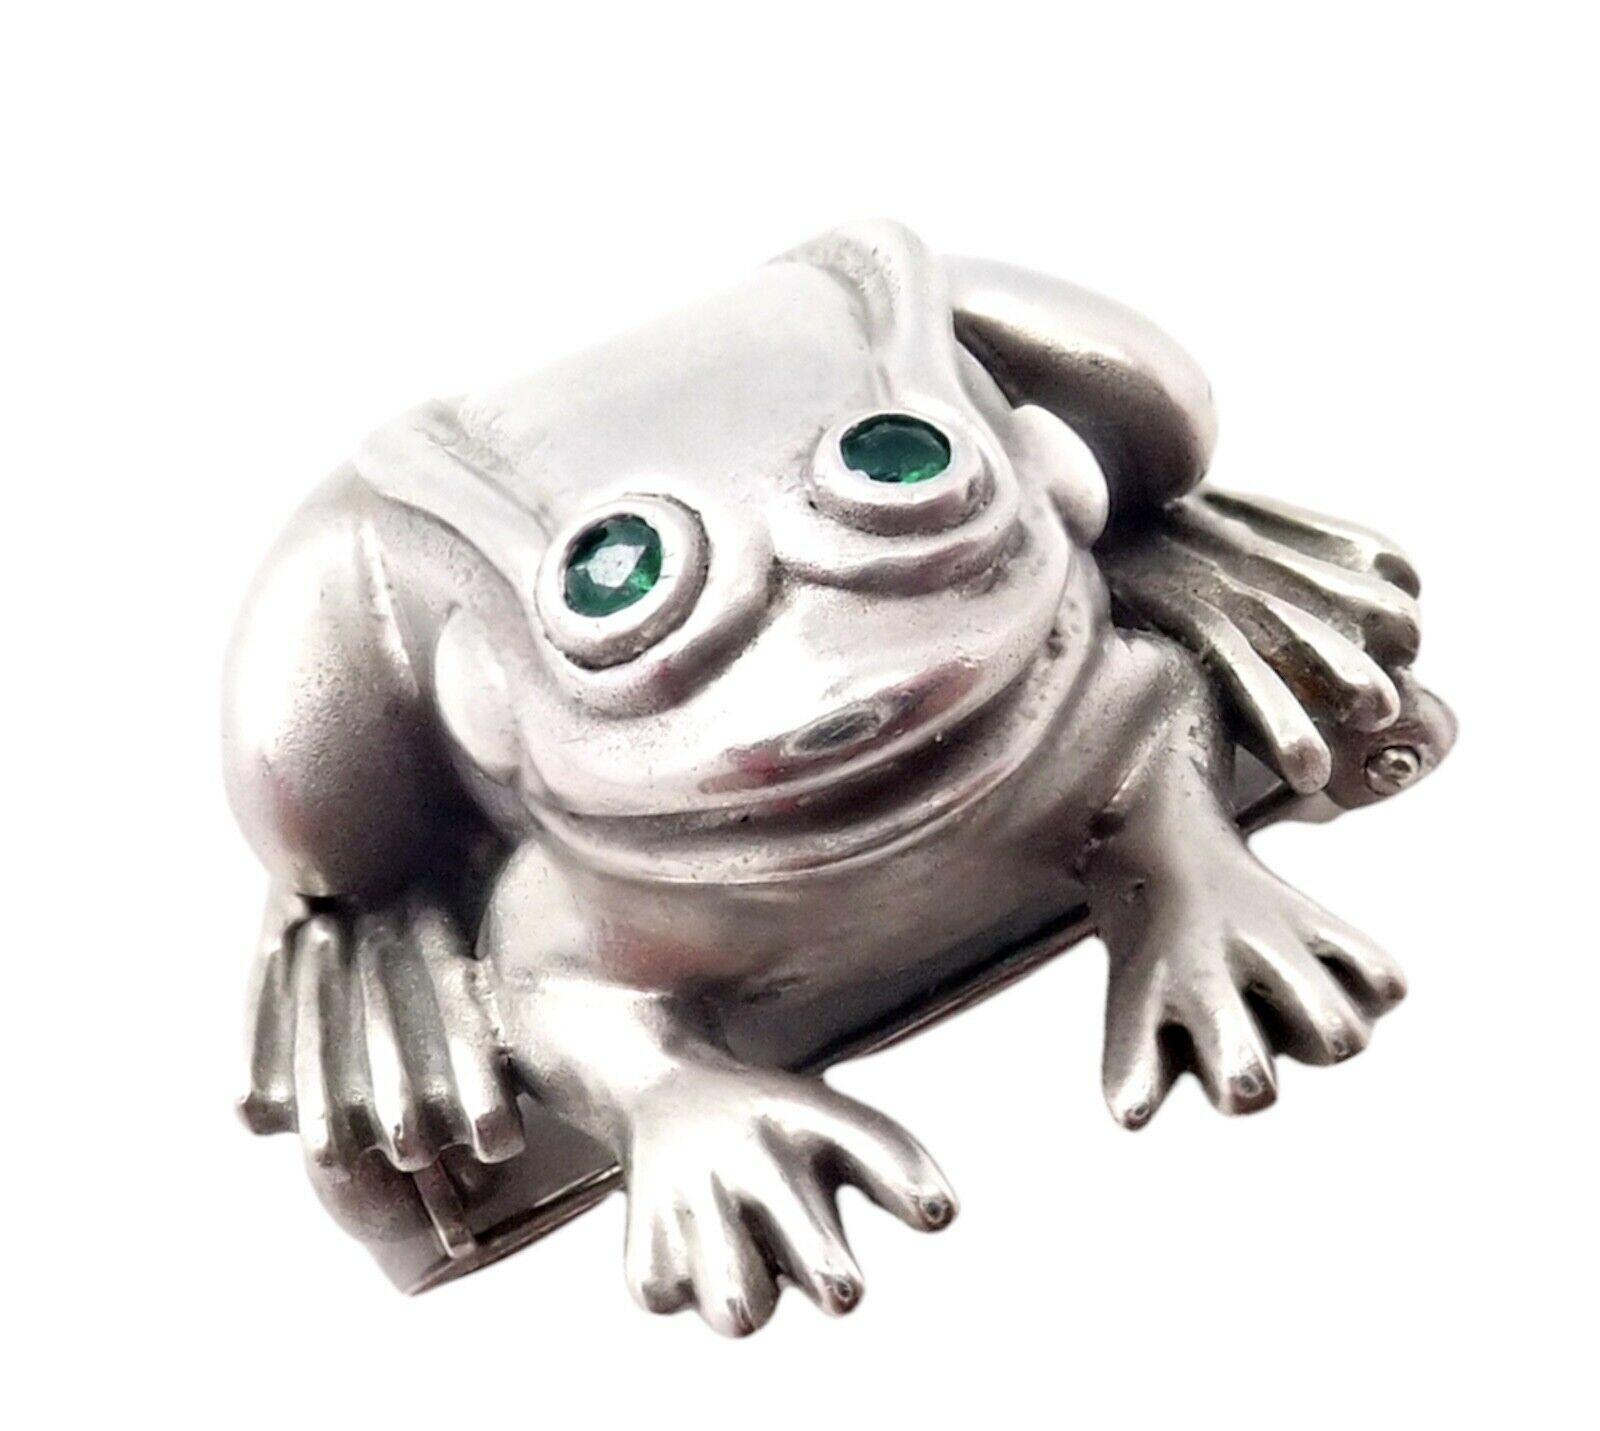 18k White Gold Emerald Frog Pin Brooch by Barry Kieselstein Cord. 
Circa 1998
2 small round emeralds in the eyes.
Details:
Measurements: 22mm x 23mm
Weight: 10.7 grams
Stamped Hallmarks: Kieselstein Cord, 18k, 750, 1998
*Free Shipping within the